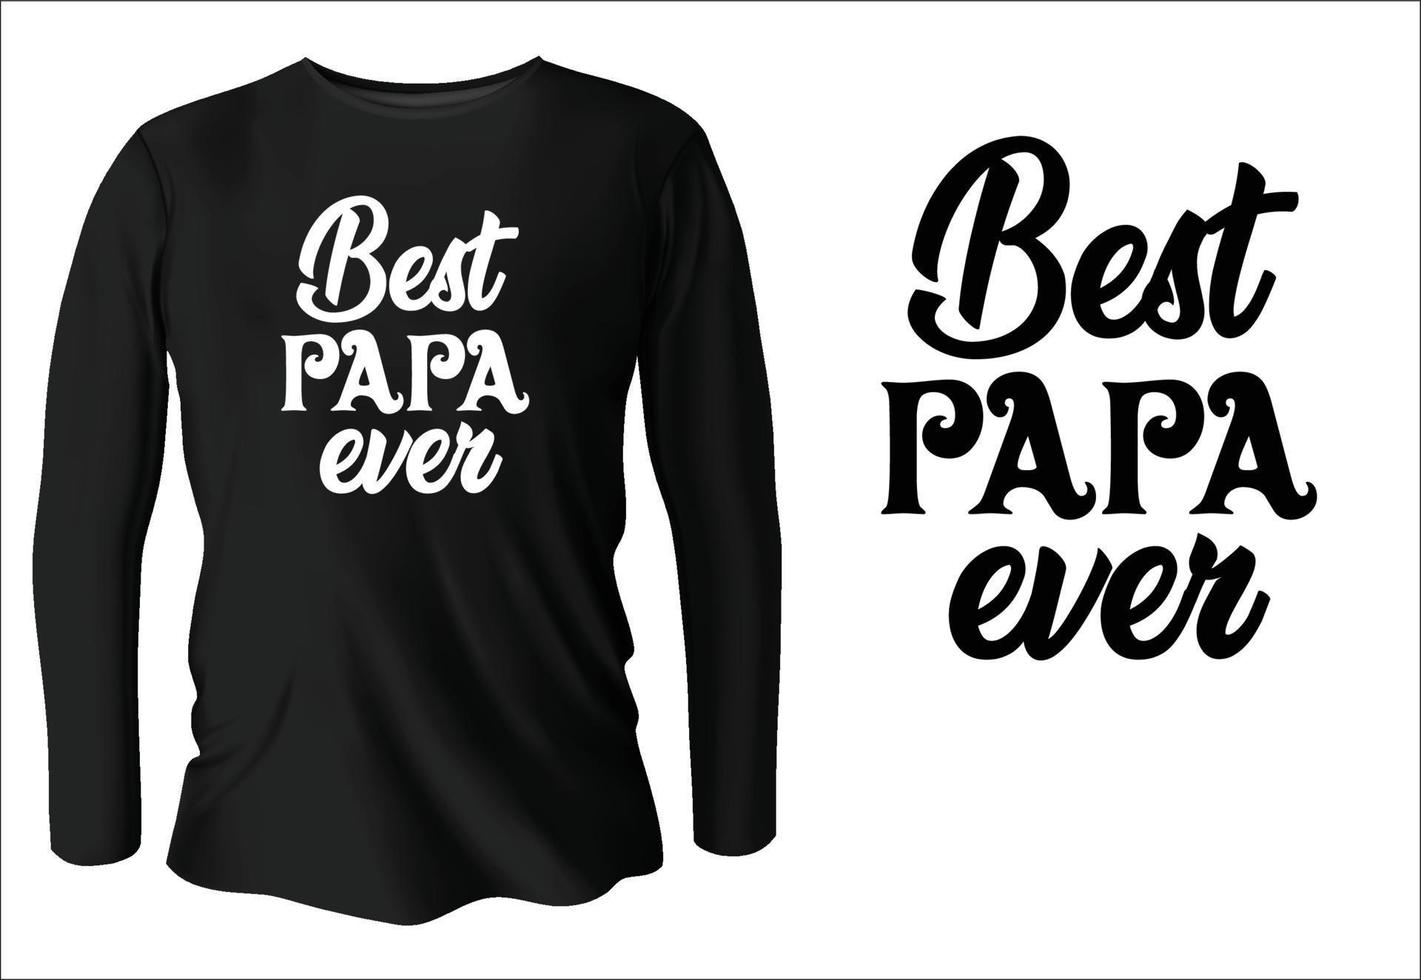 best papa ever t-shirt design with vector